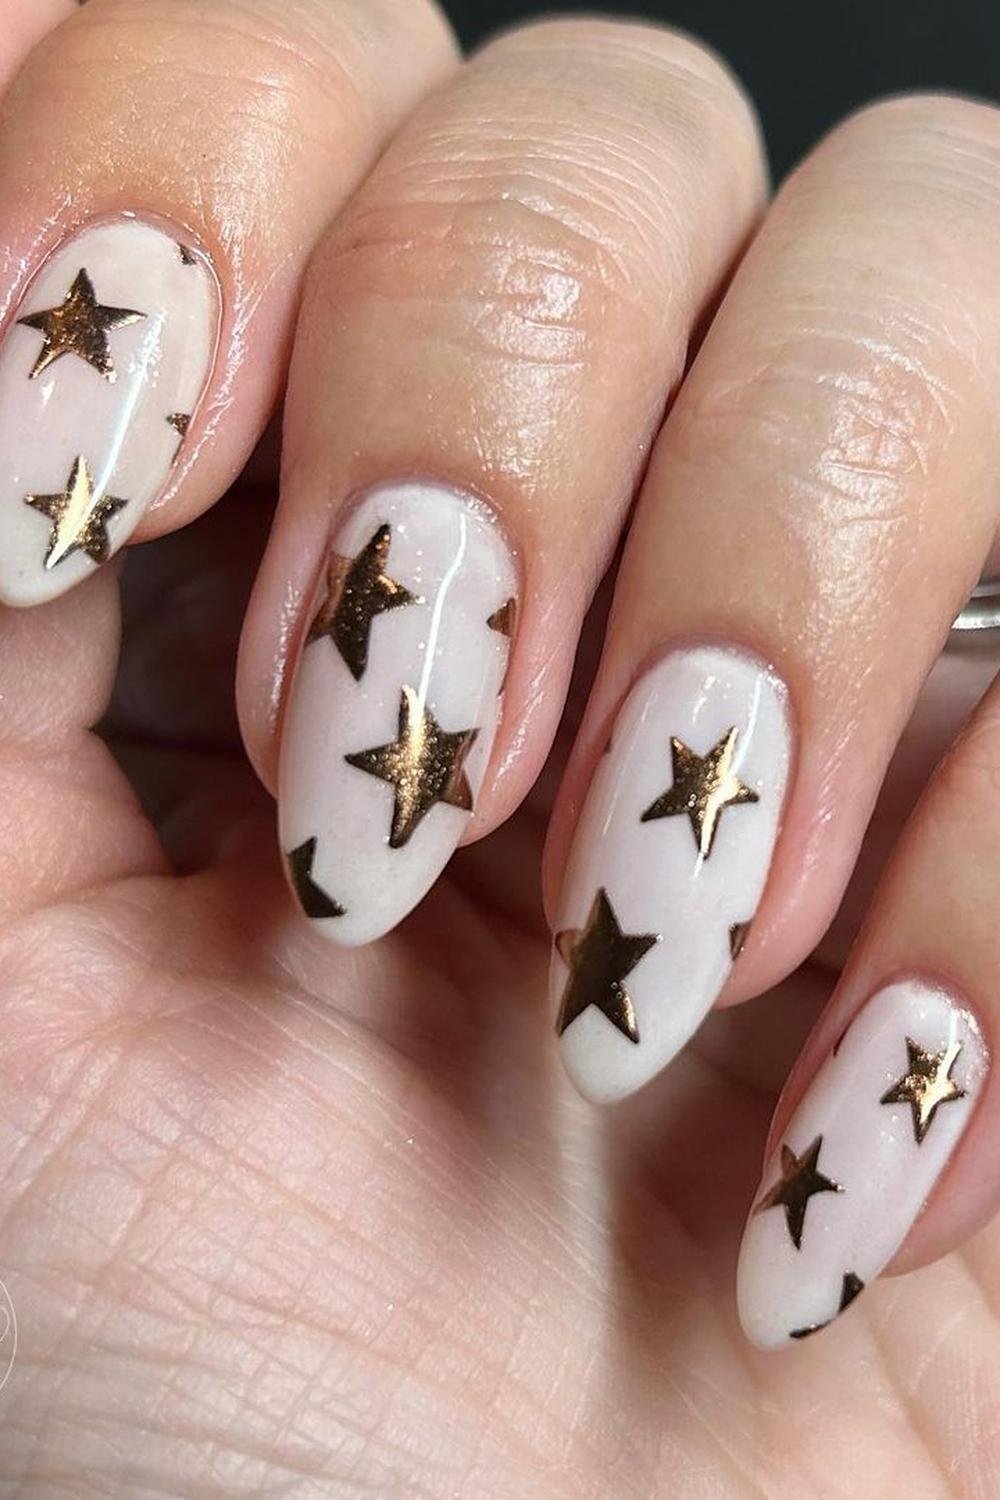 23 - Picture of Chrome Star Nails